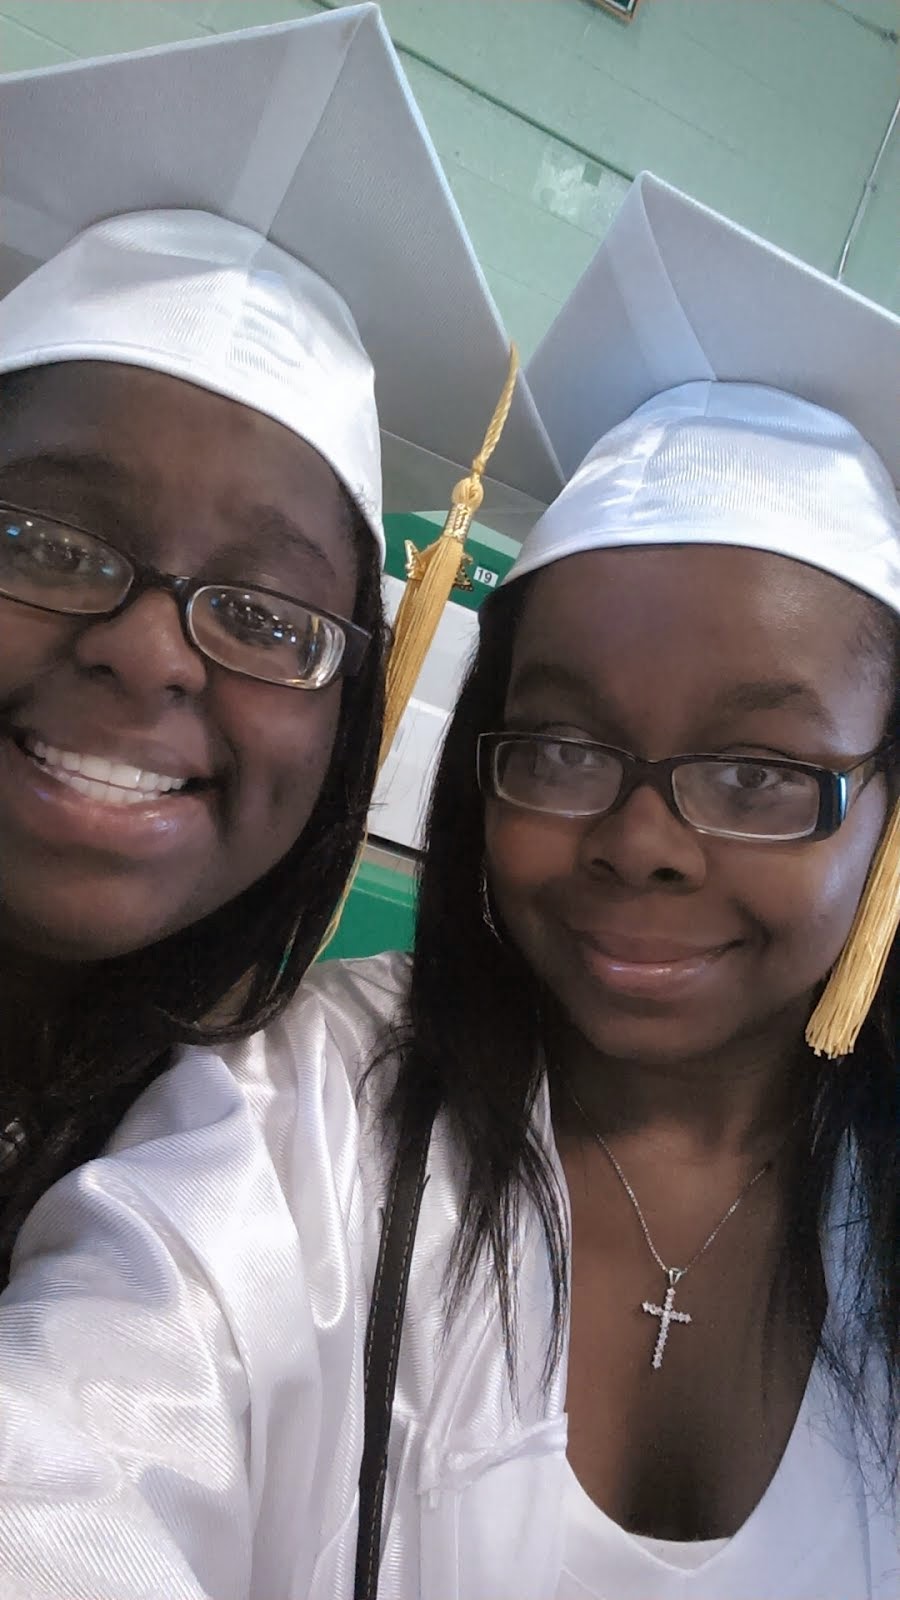 My Best Friend and I at Graduation